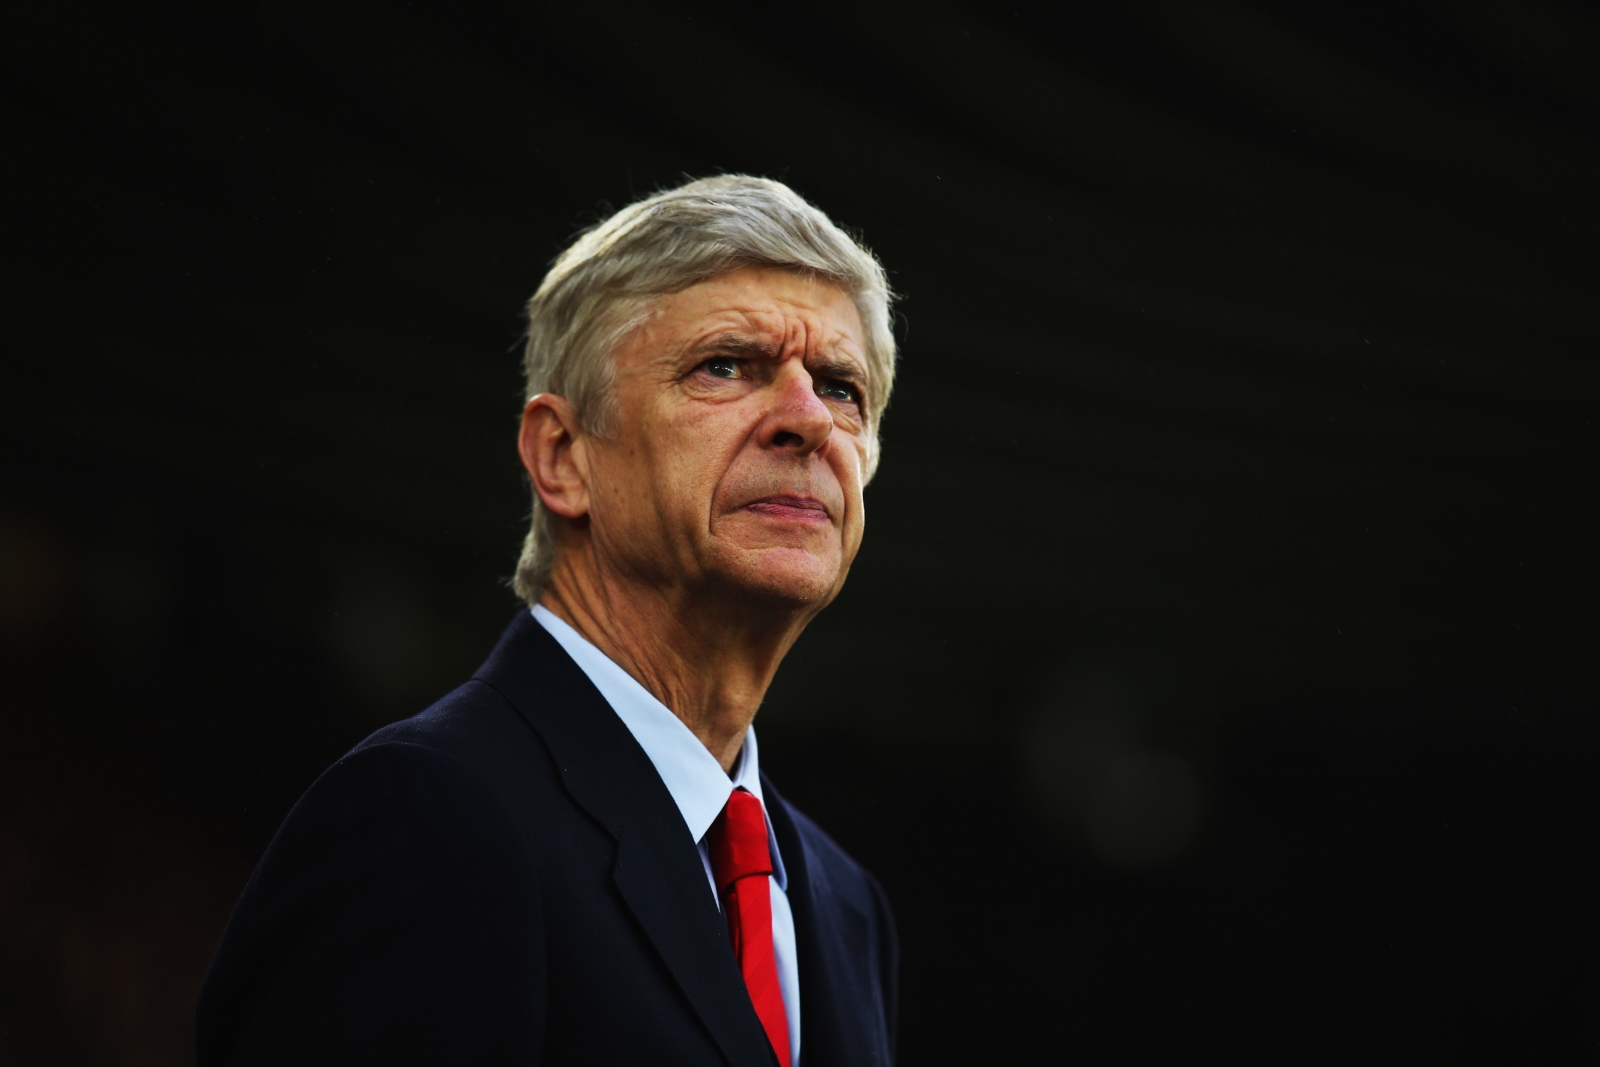 Wenger's Future at Arsenal Not Secure - Spur Magazine